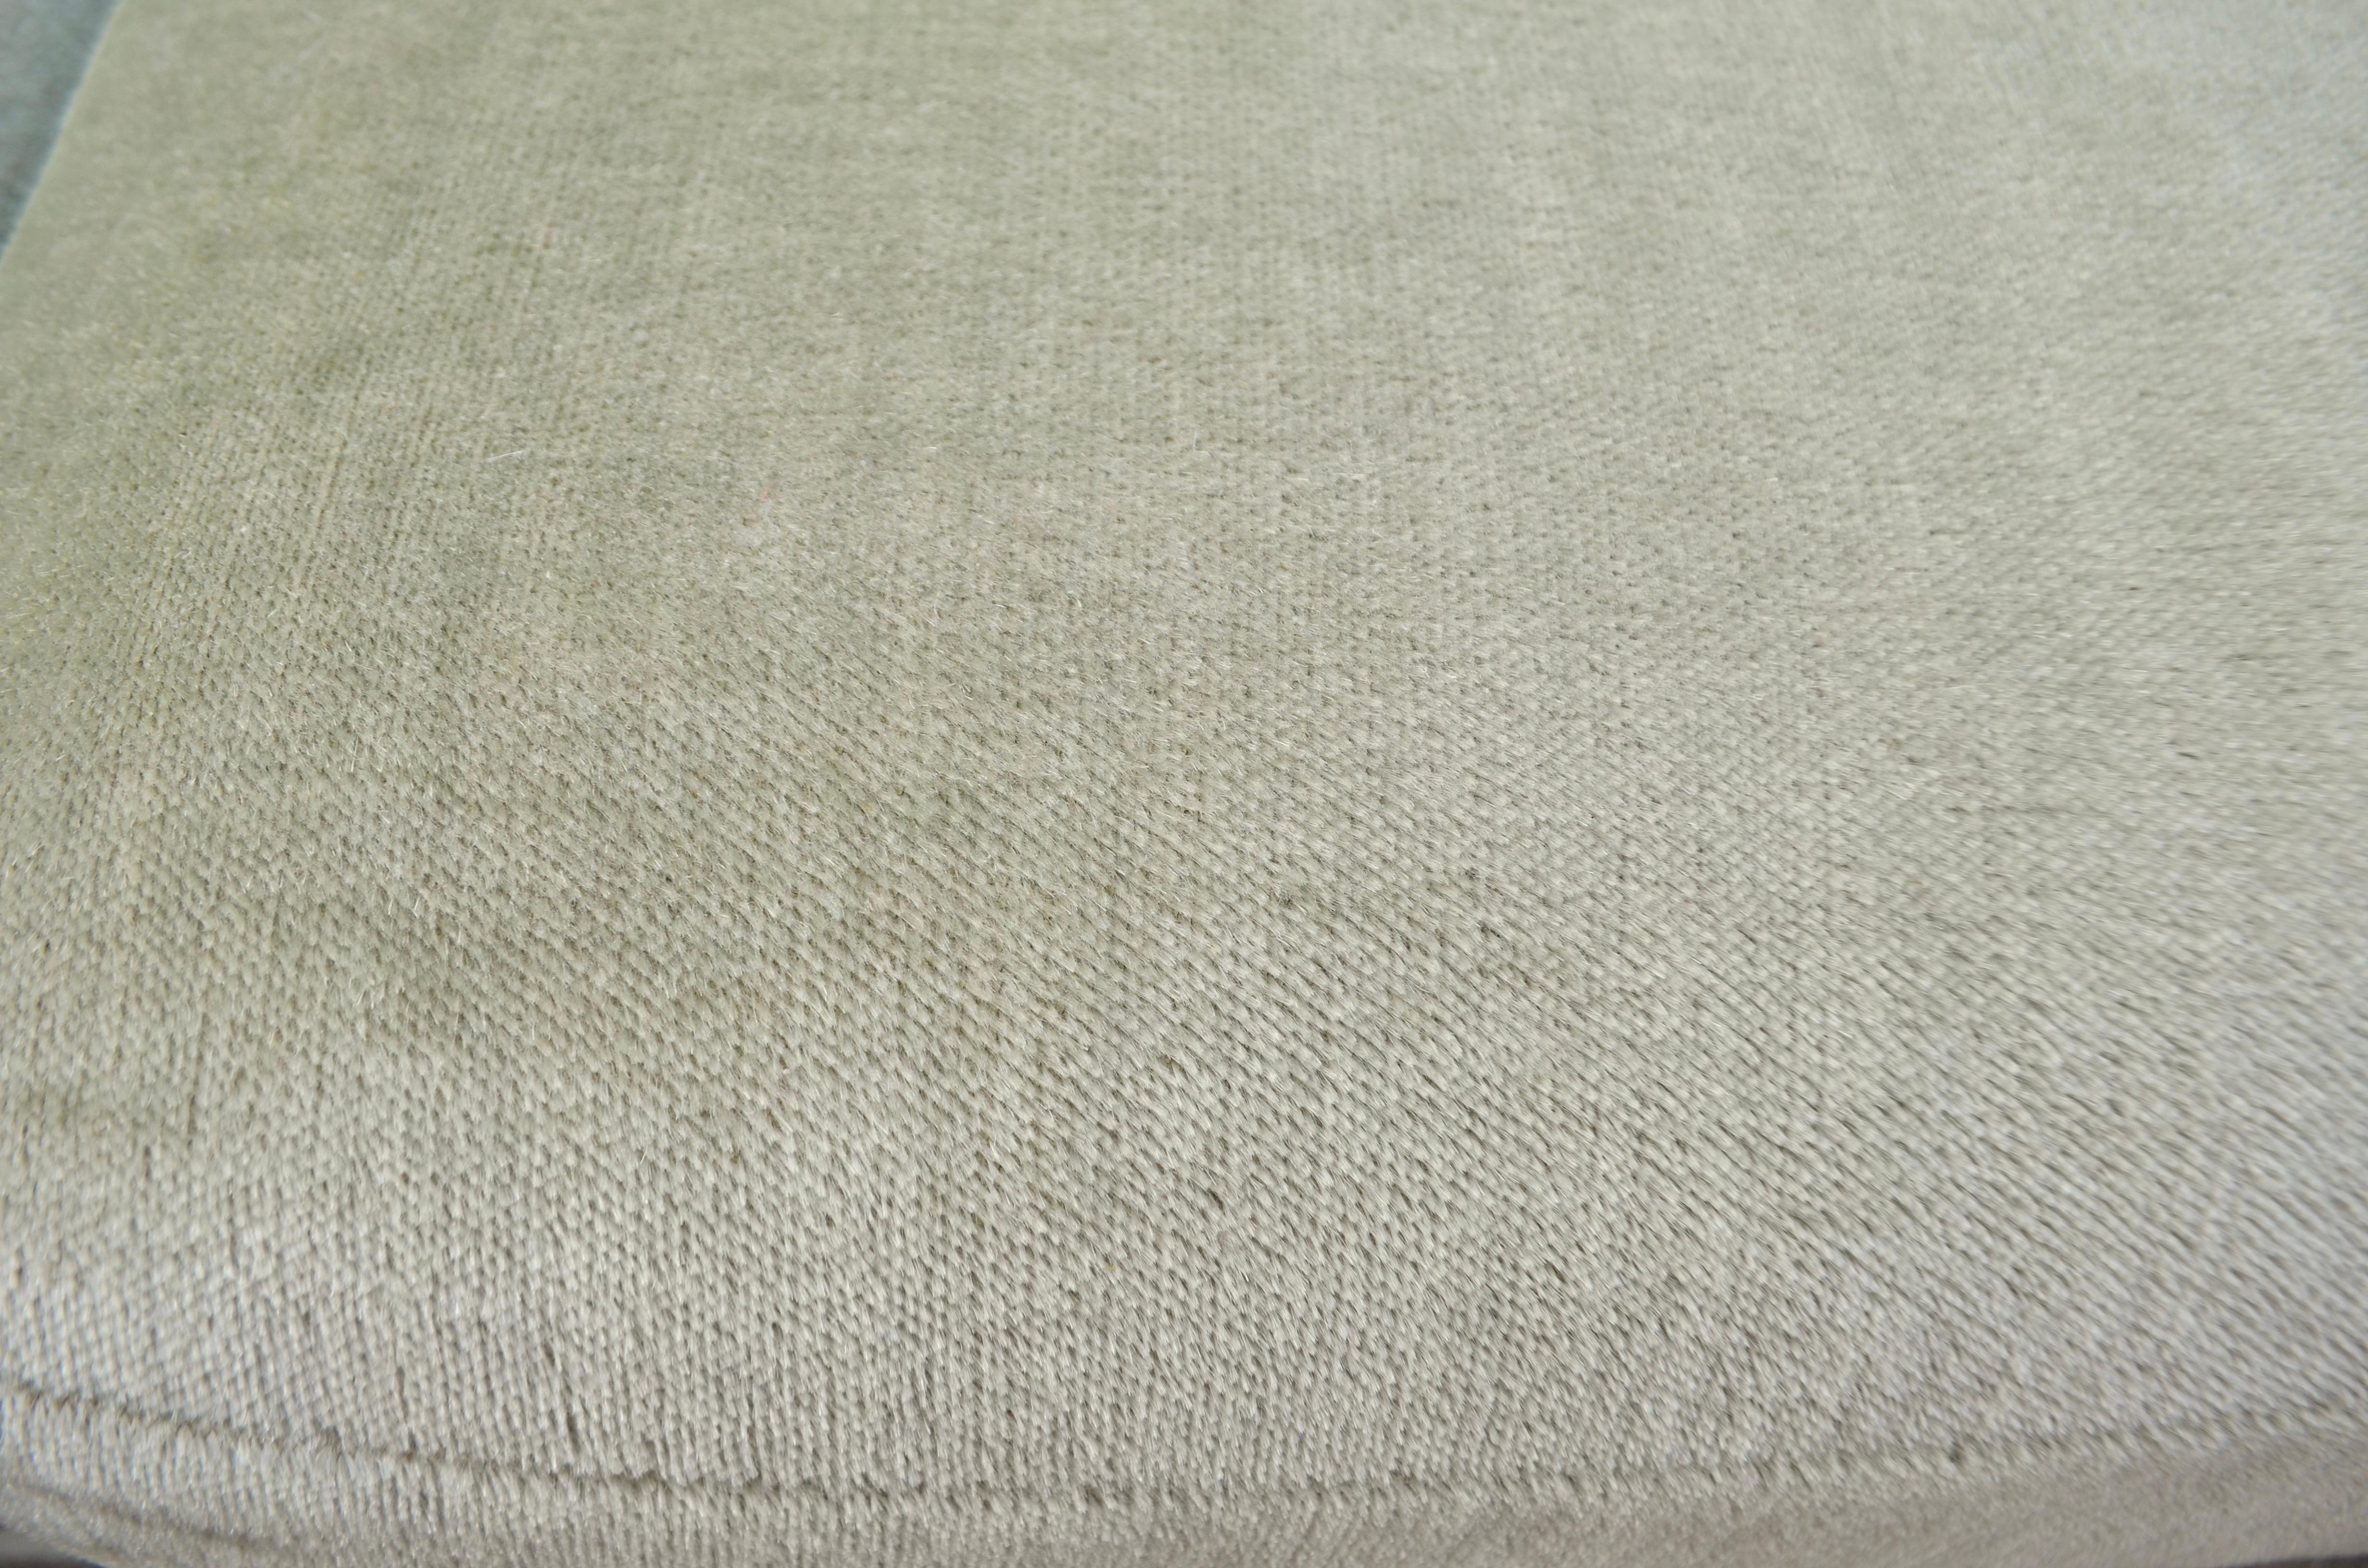 Upholstery Laauser Vintage Living Room Suite Modular 70s Mohair Green Sectional Sofa